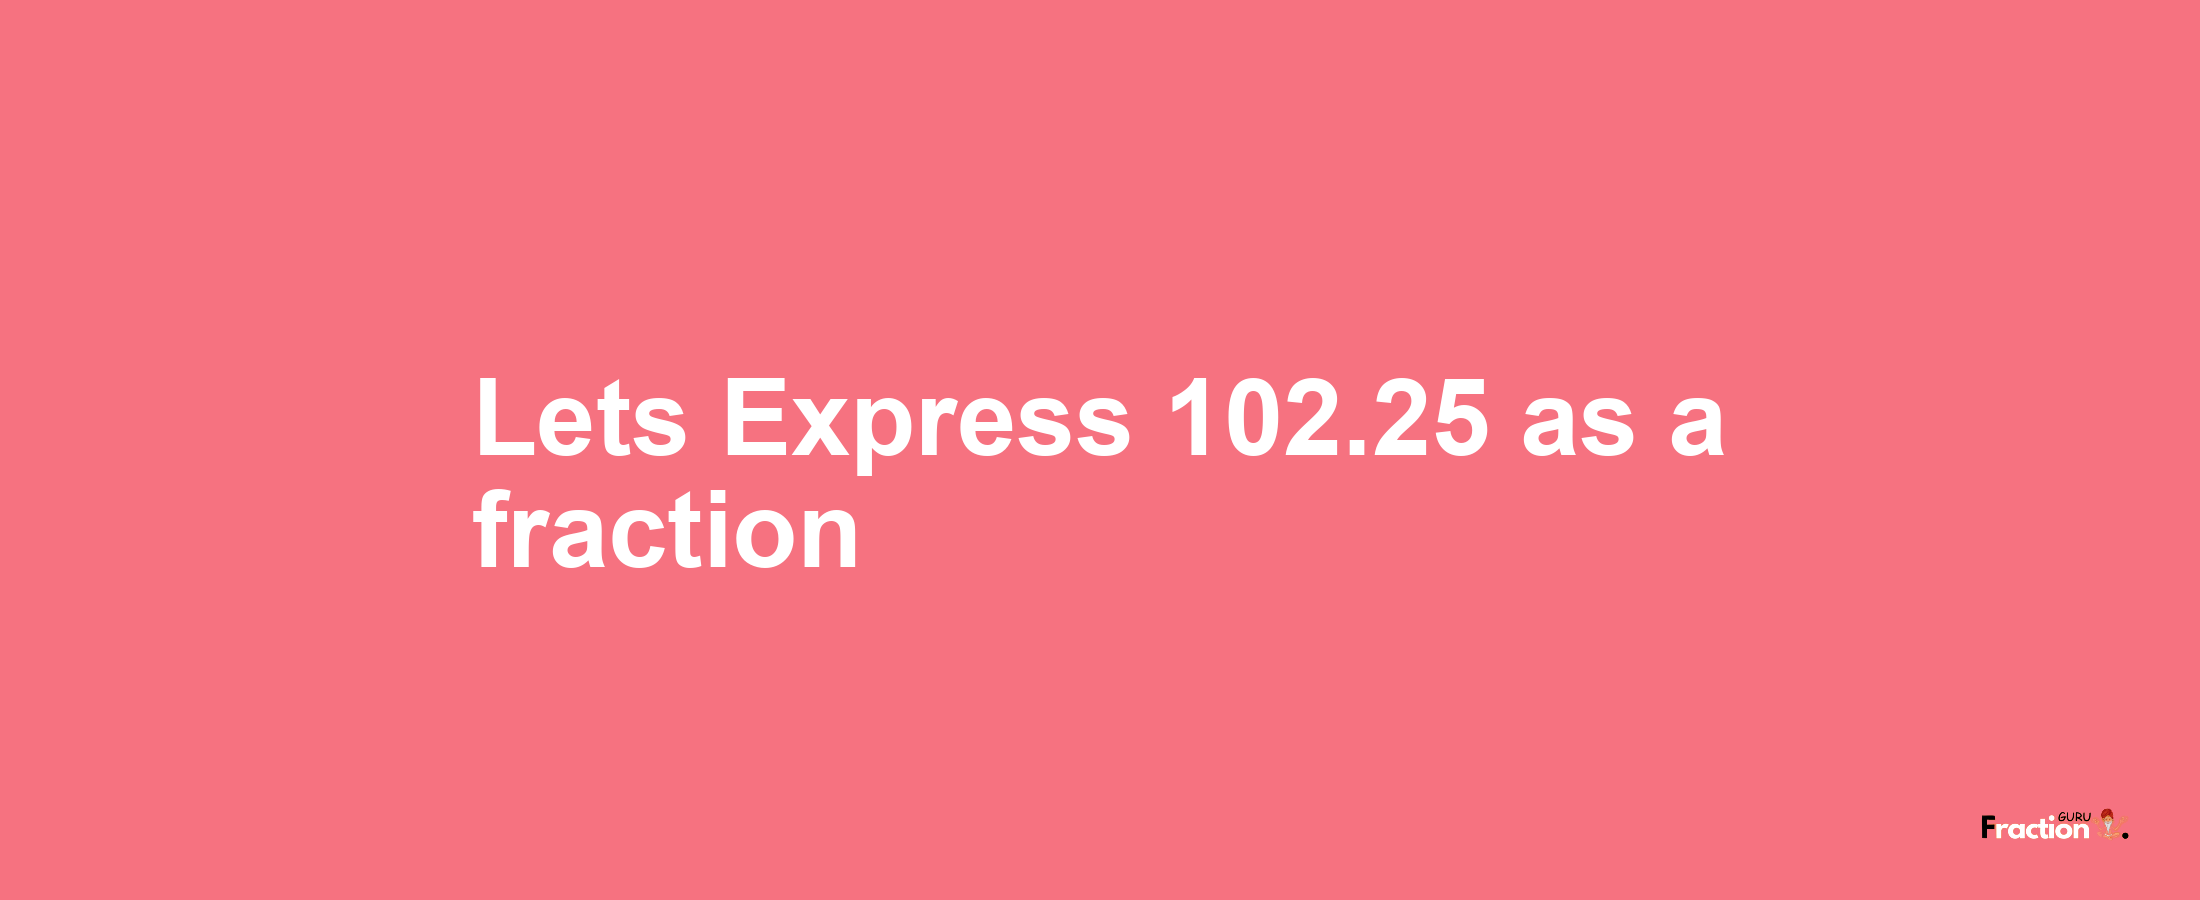 Lets Express 102.25 as afraction